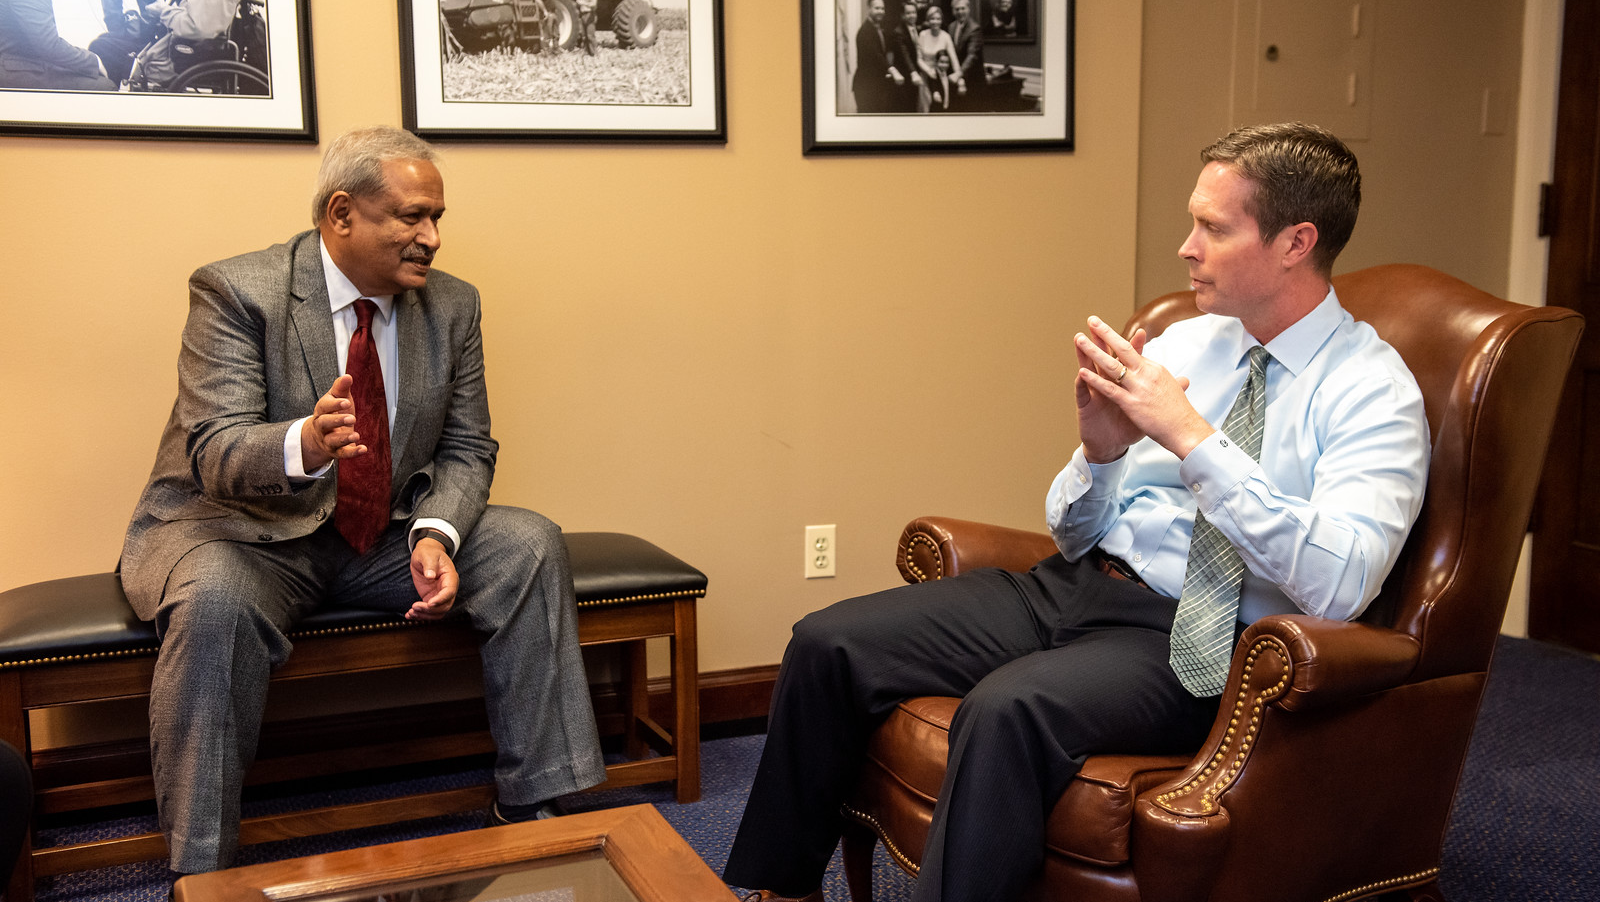 Global Membership Committee member Trichur Raju (left) meets with Rep. Rodney Davis (R-IL) to discuss brain science research supported by NIH and NSF.